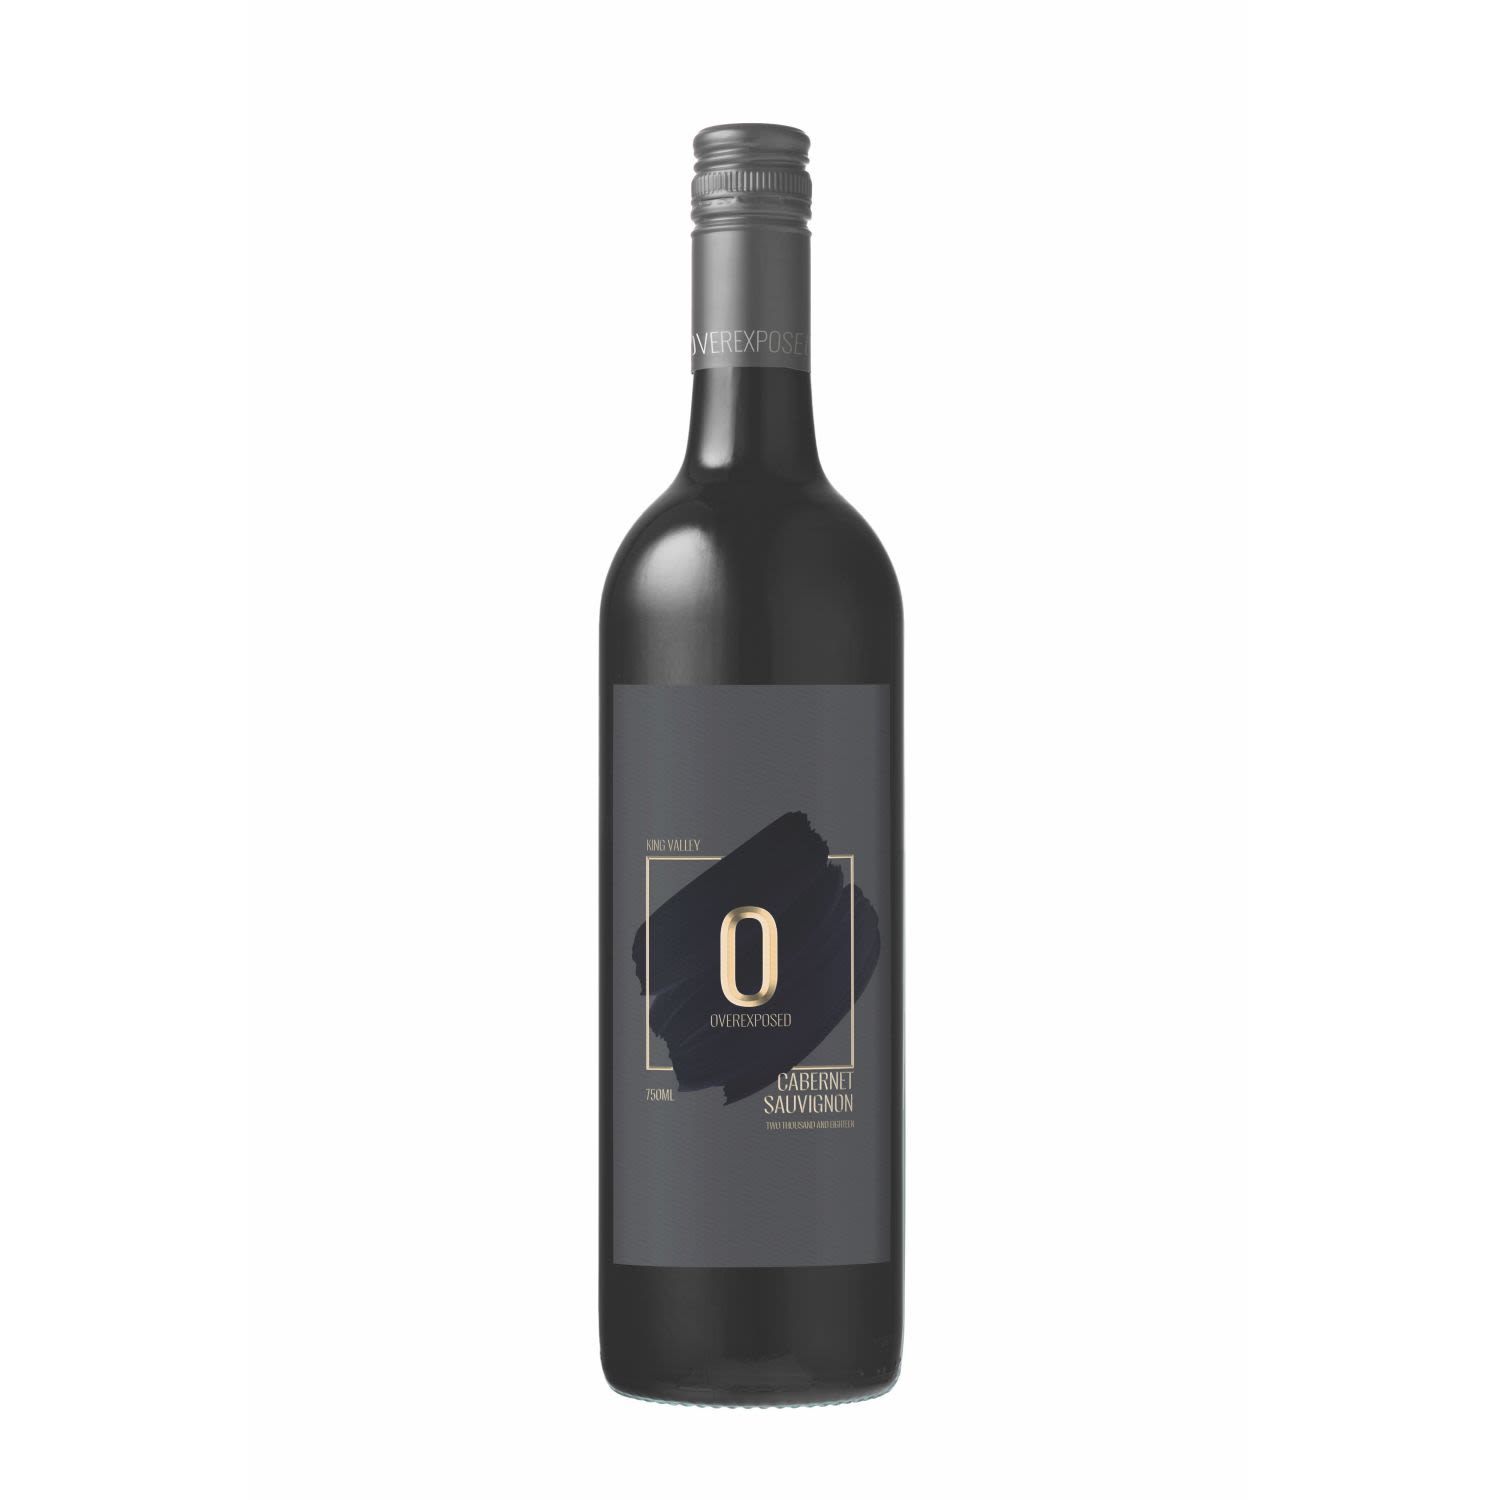 This King Valley Cabernet Sauvignon doesn’t disappoint, but stays true to the region’s distinguished reputation as offering full-bodied flavour with pronounced fruit notes. Serve with beef ribs, strong hard cheese and roast lamb.<br /> <br />Alcohol Volume: 14.50%<br /><br />Pack Format: Bottle<br /><br />Standard Drinks: 8.6</br /><br />Pack Type: Bottle<br /><br />Country of Origin: Australia<br /><br />Region: King Valley<br /><br />Vintage: Vintages Vary<br />